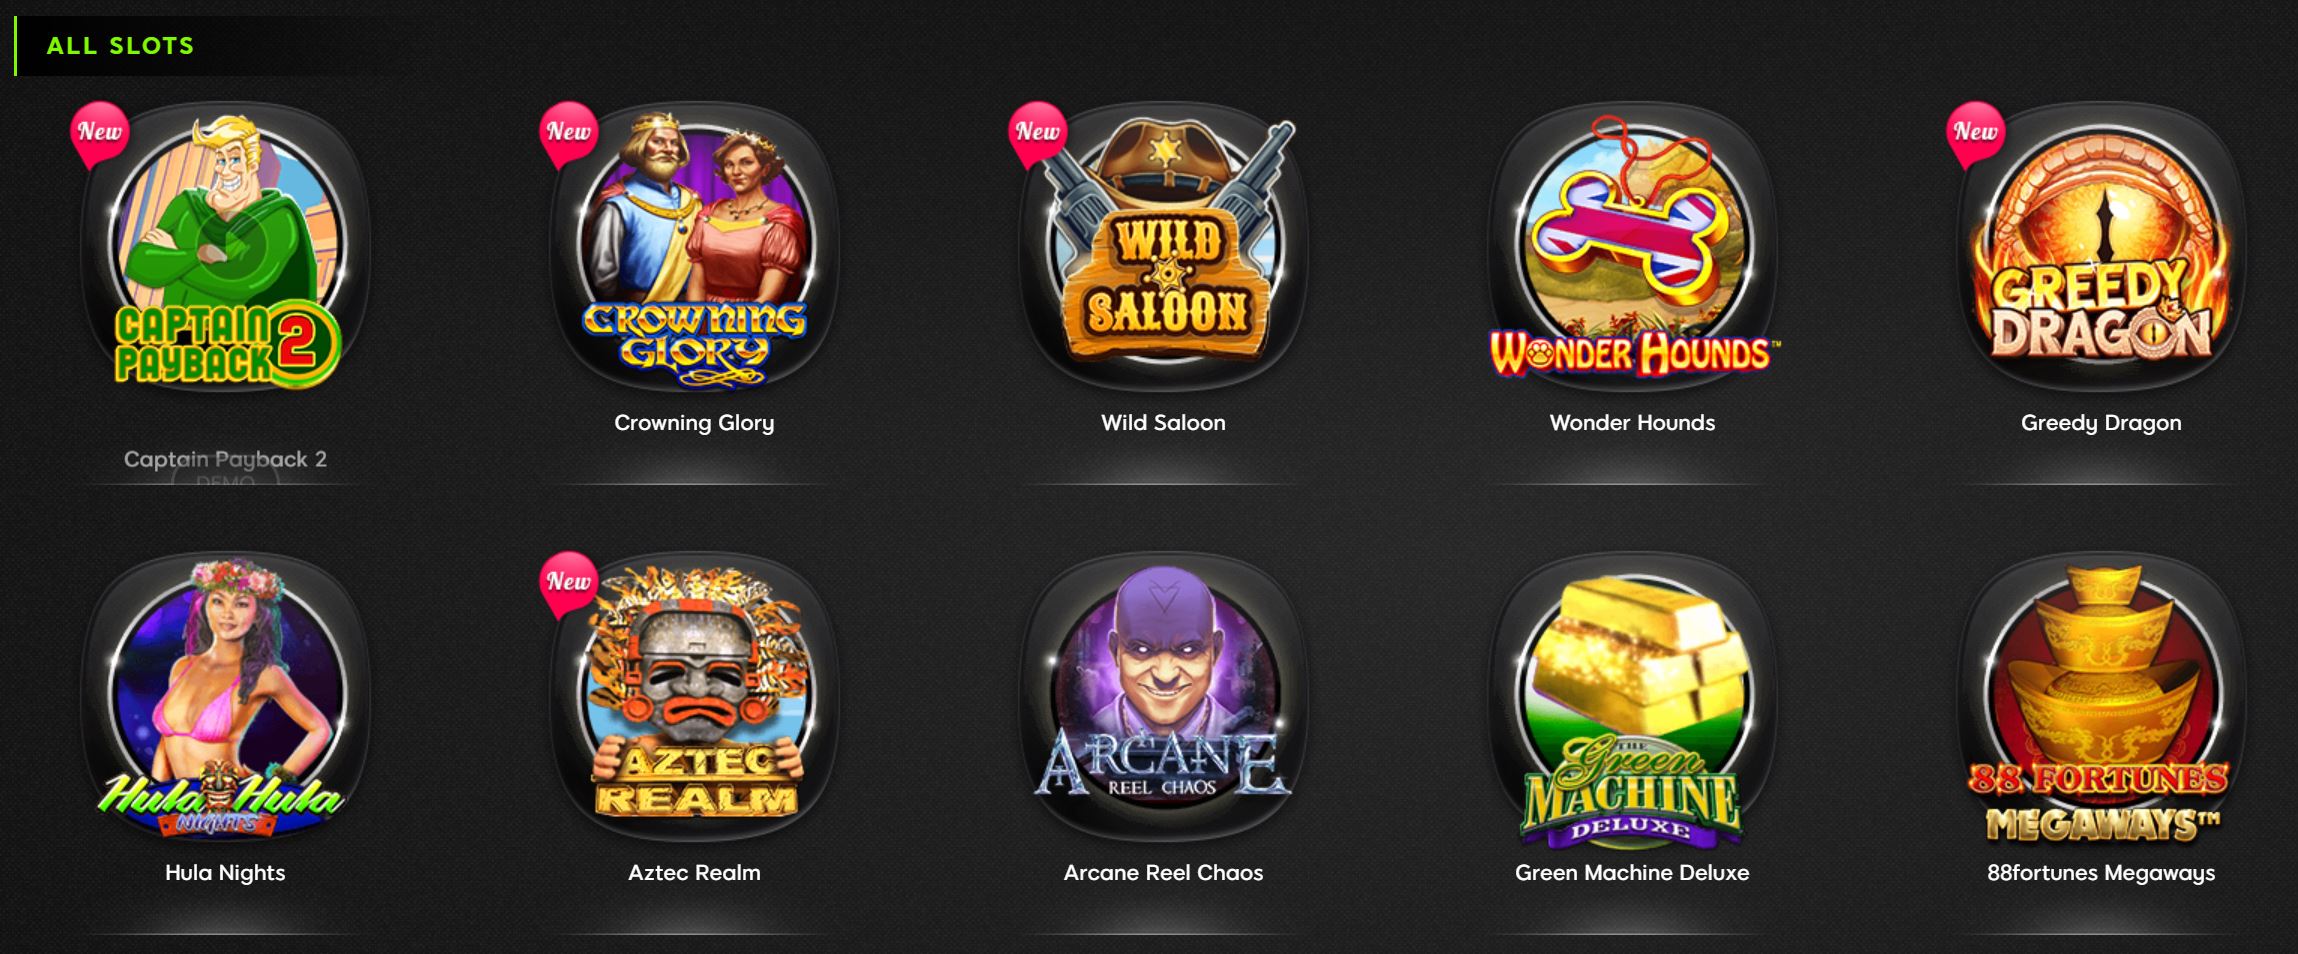 At 888 Casino there is a wide variety of slots.